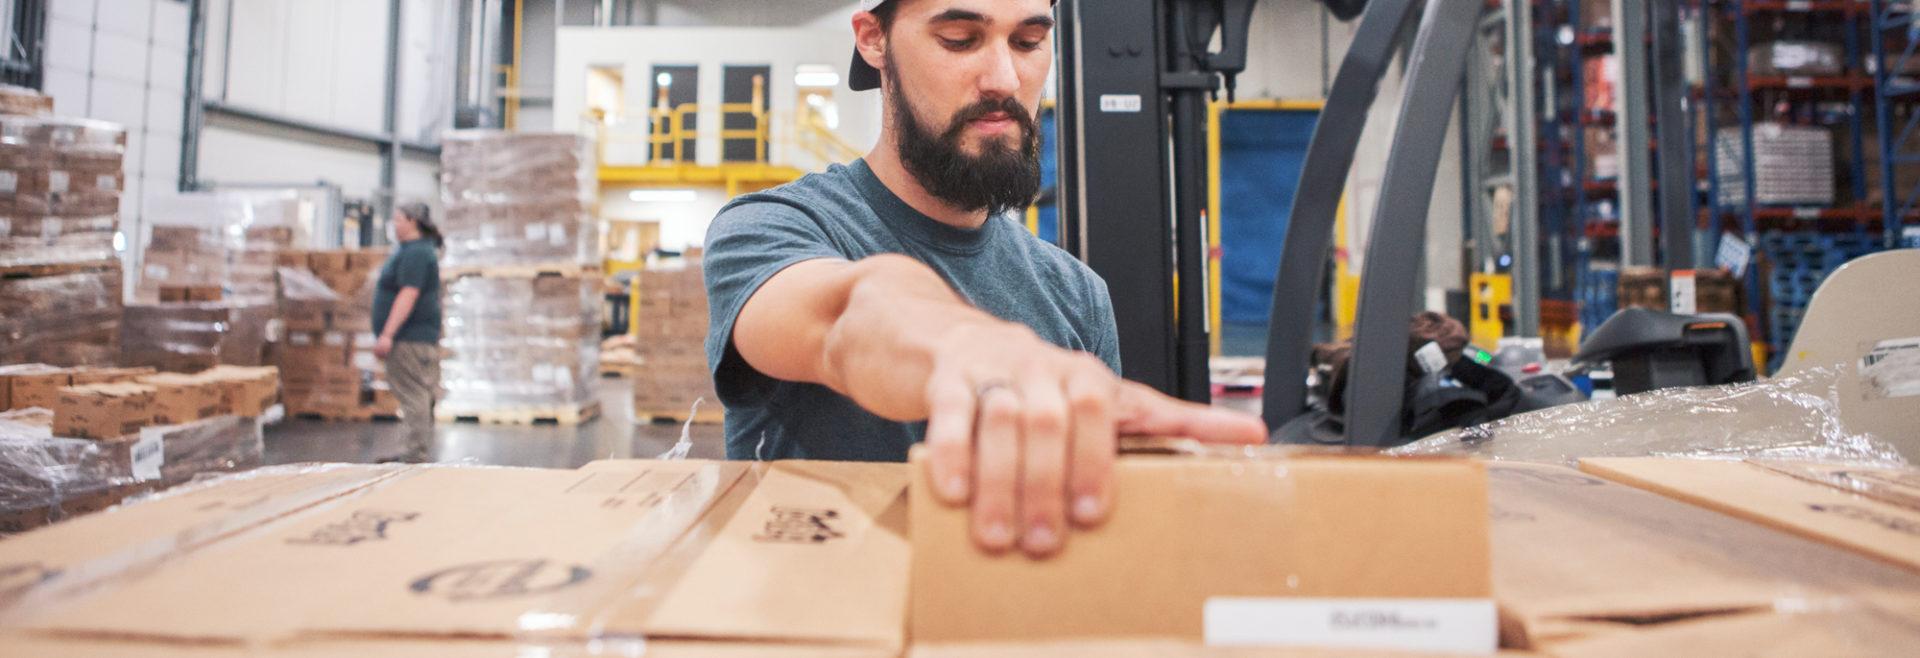 man pulling a box in a warehouse